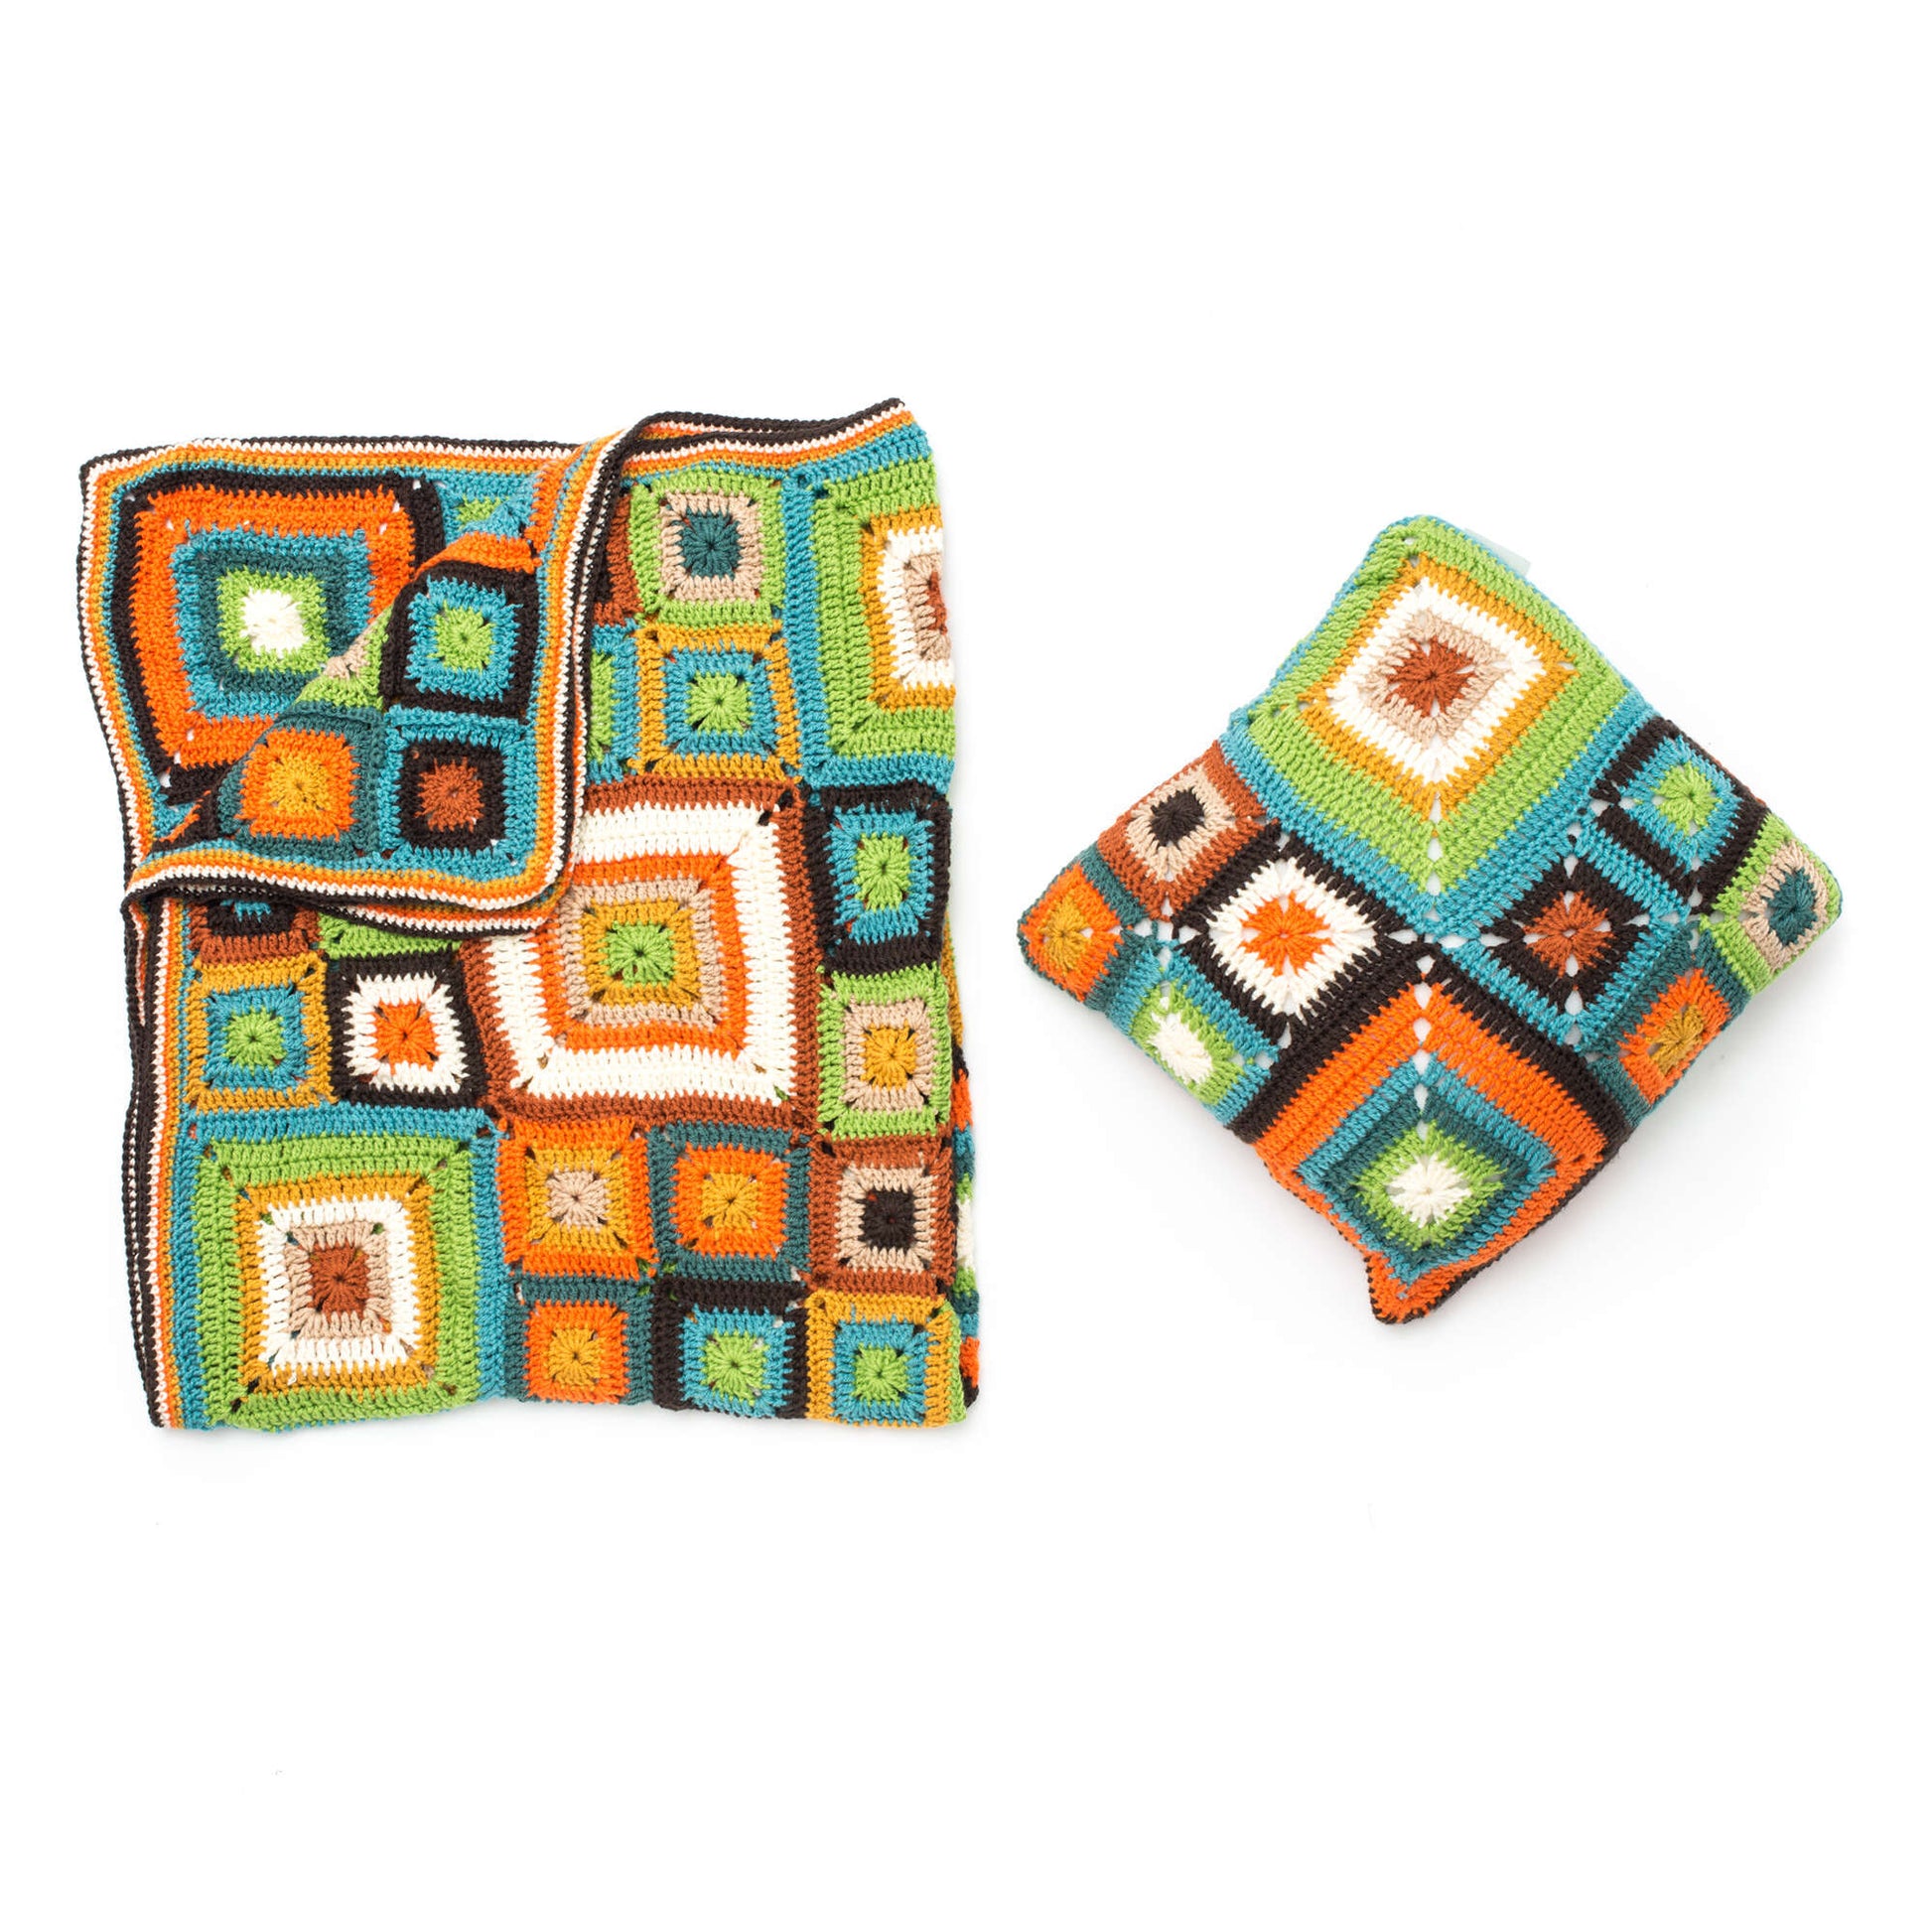 Patons Bright Squares Crochet Blanket And Pillow Set Single Size